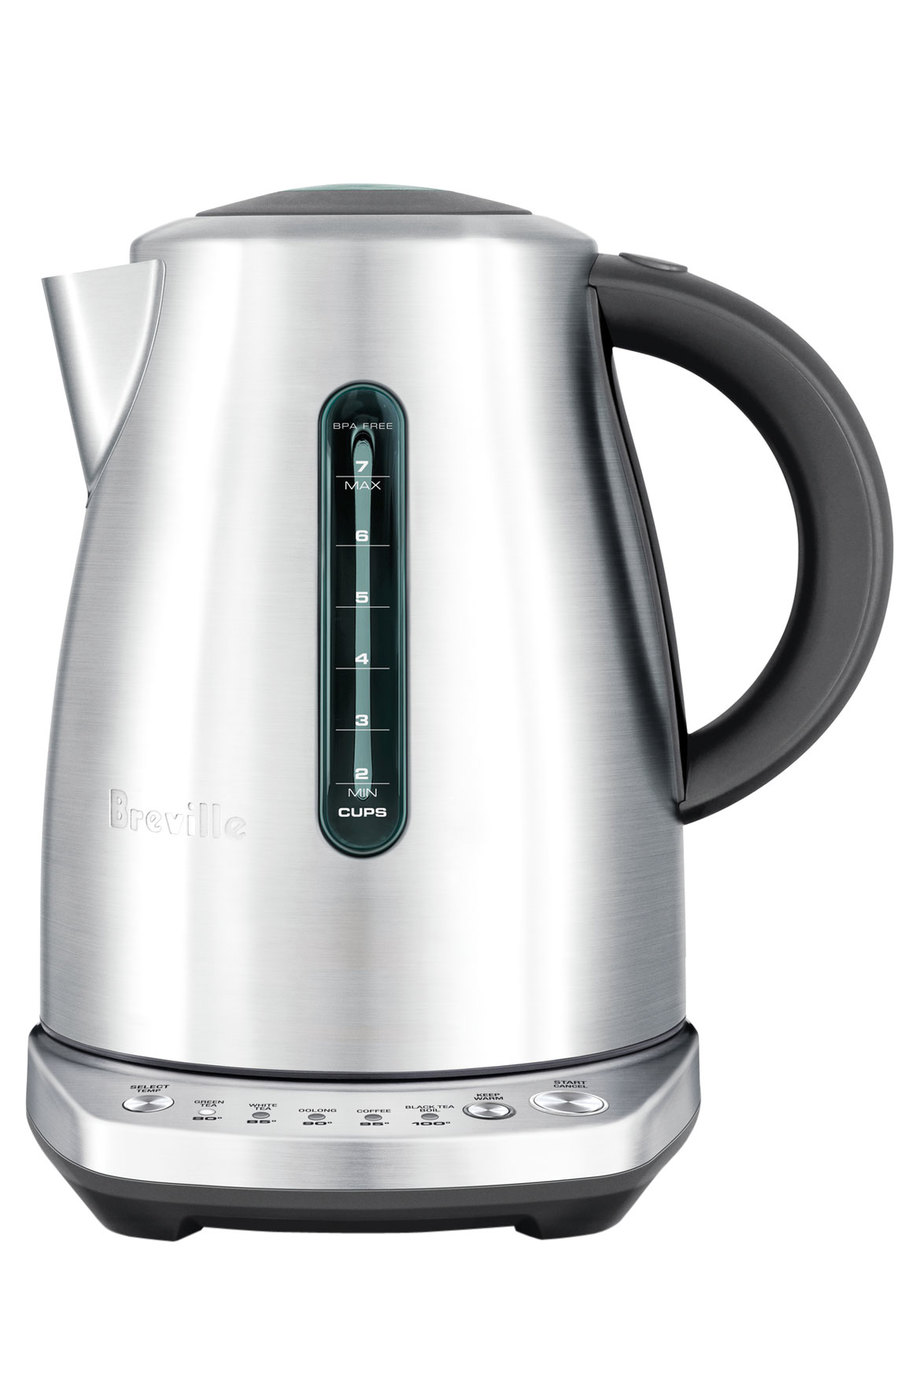 Temp controlled kettle for the perfect cup